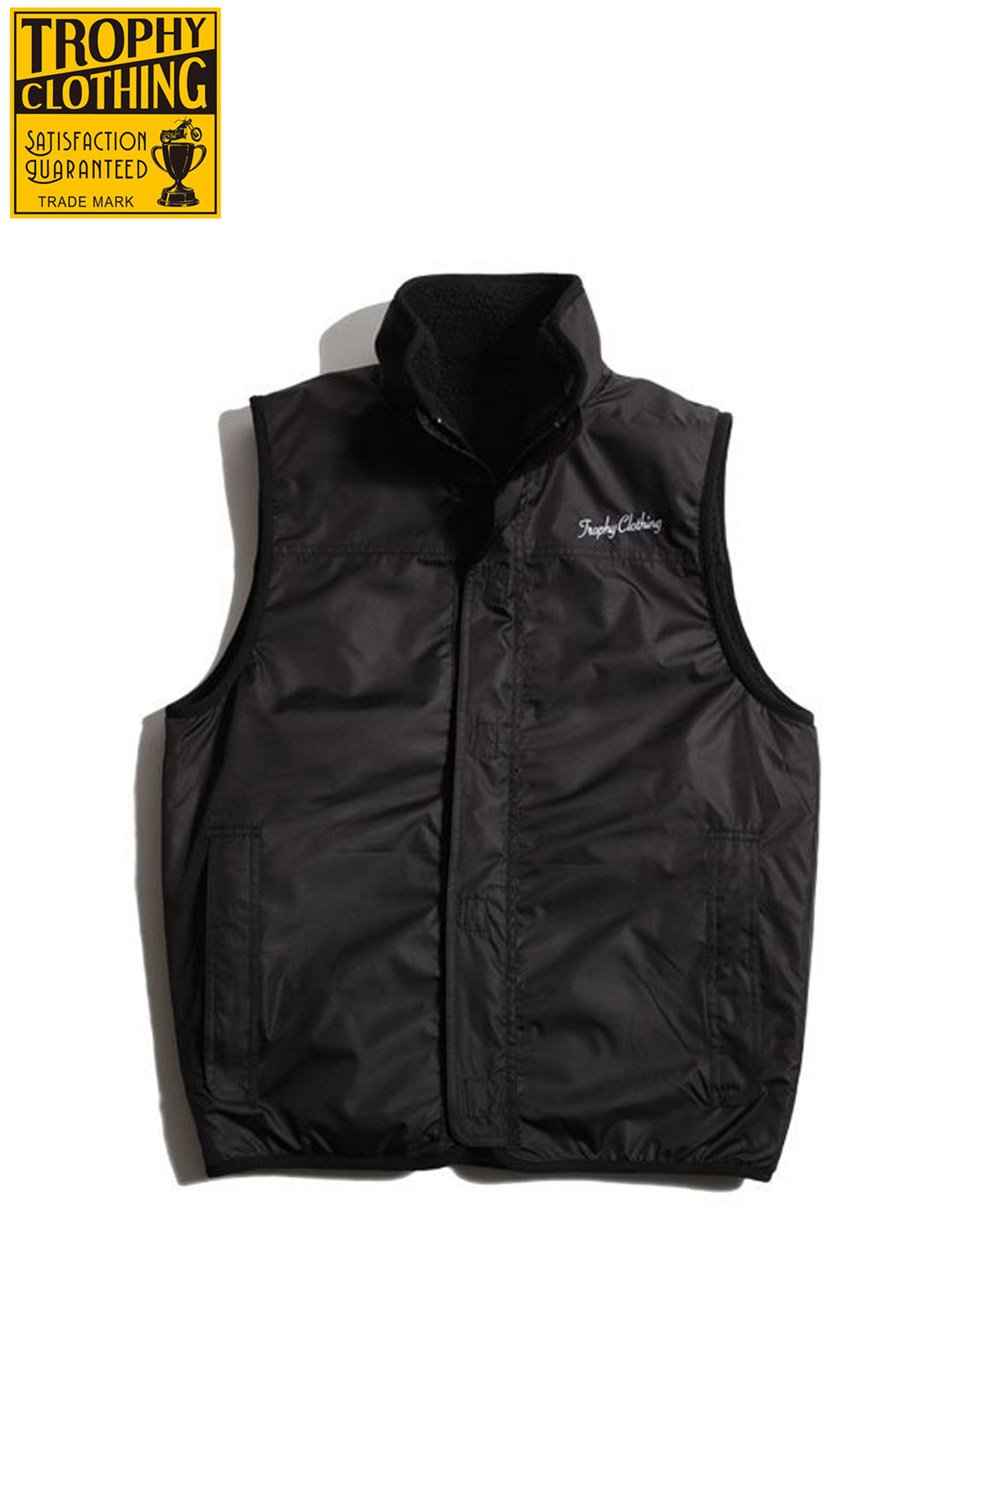 TROPHY CLOTHING(トロフィークロージング) マウンテンベスト 2FACE MOUNTAIN VEST TR21AW-301 通販正規取扱  | ハーレムストア公式通販サイト